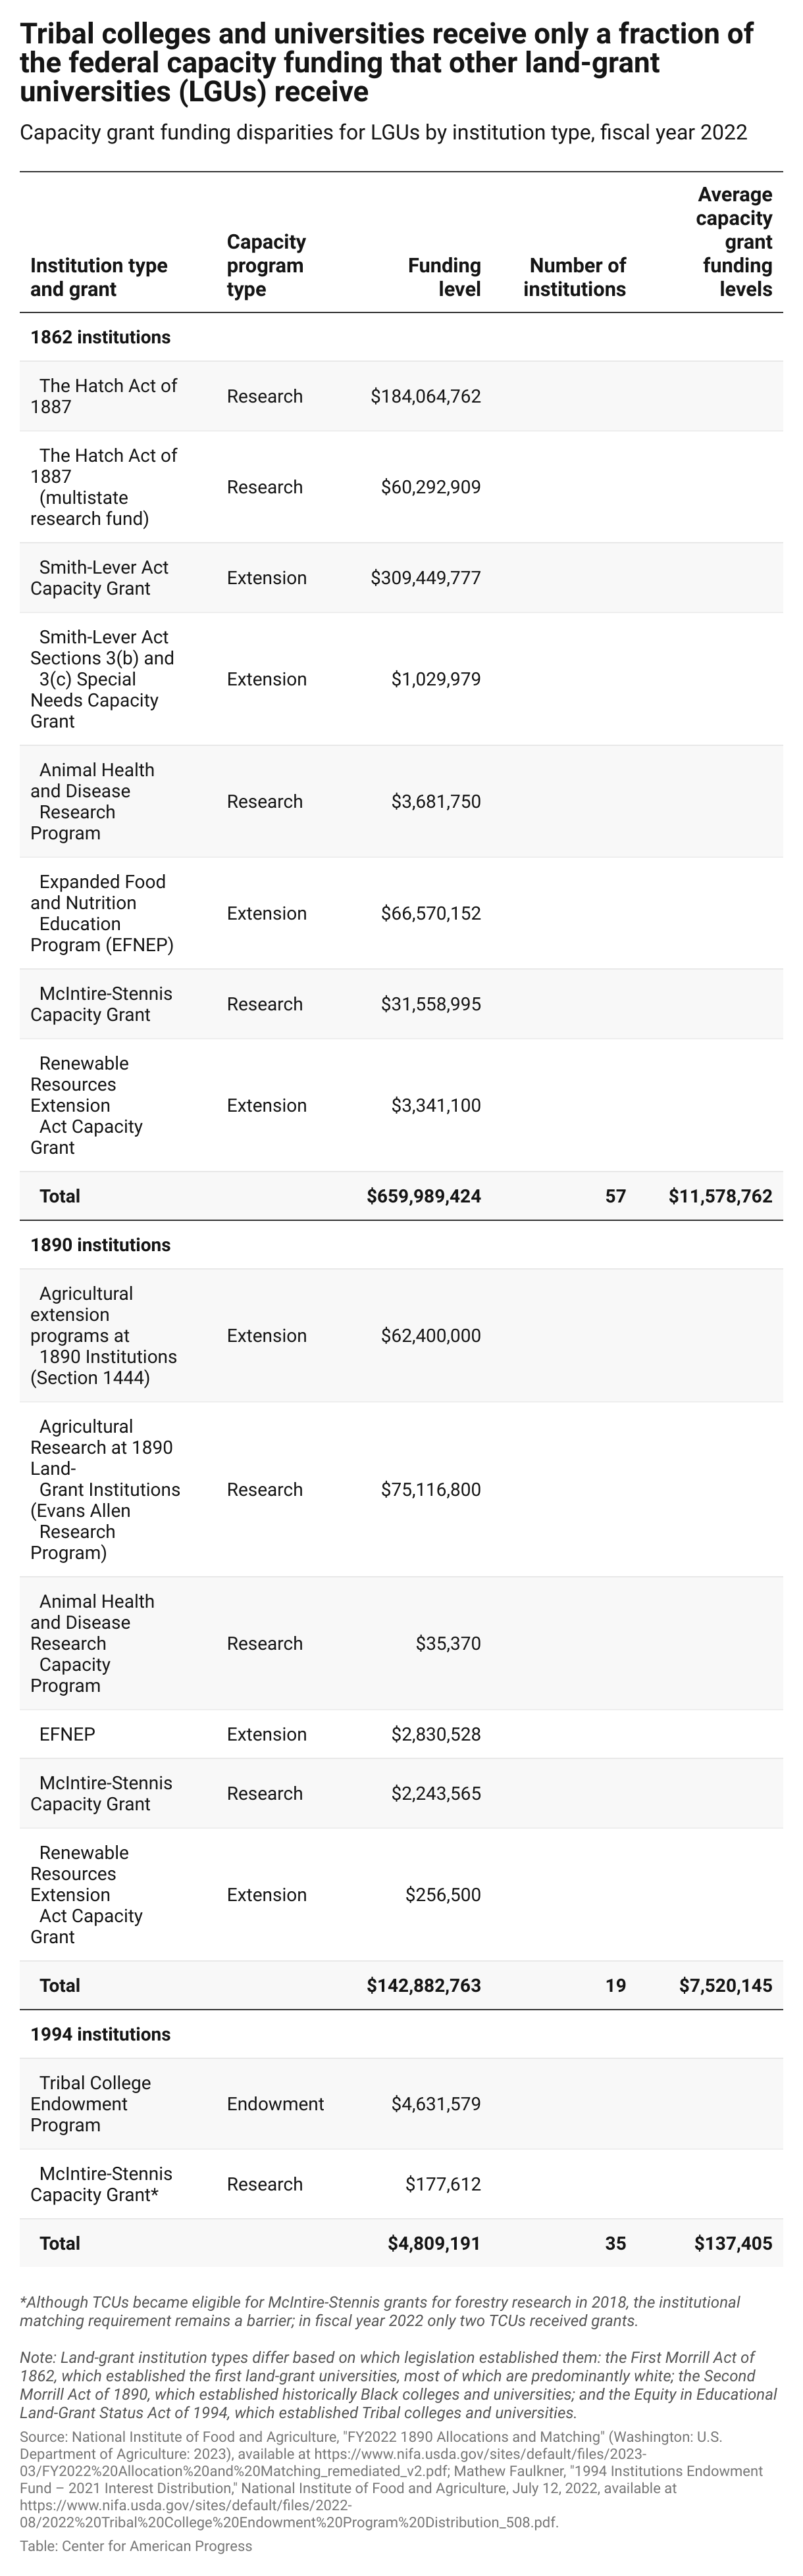 Data table showing the funding levels for capacity grants for different types of land-grant universities. While 1862 institutions and 1890 institutions received approximately $9 million and $7 million per institution on average in fiscal year 2022, 1994 institutions only received $130,000 each on average.